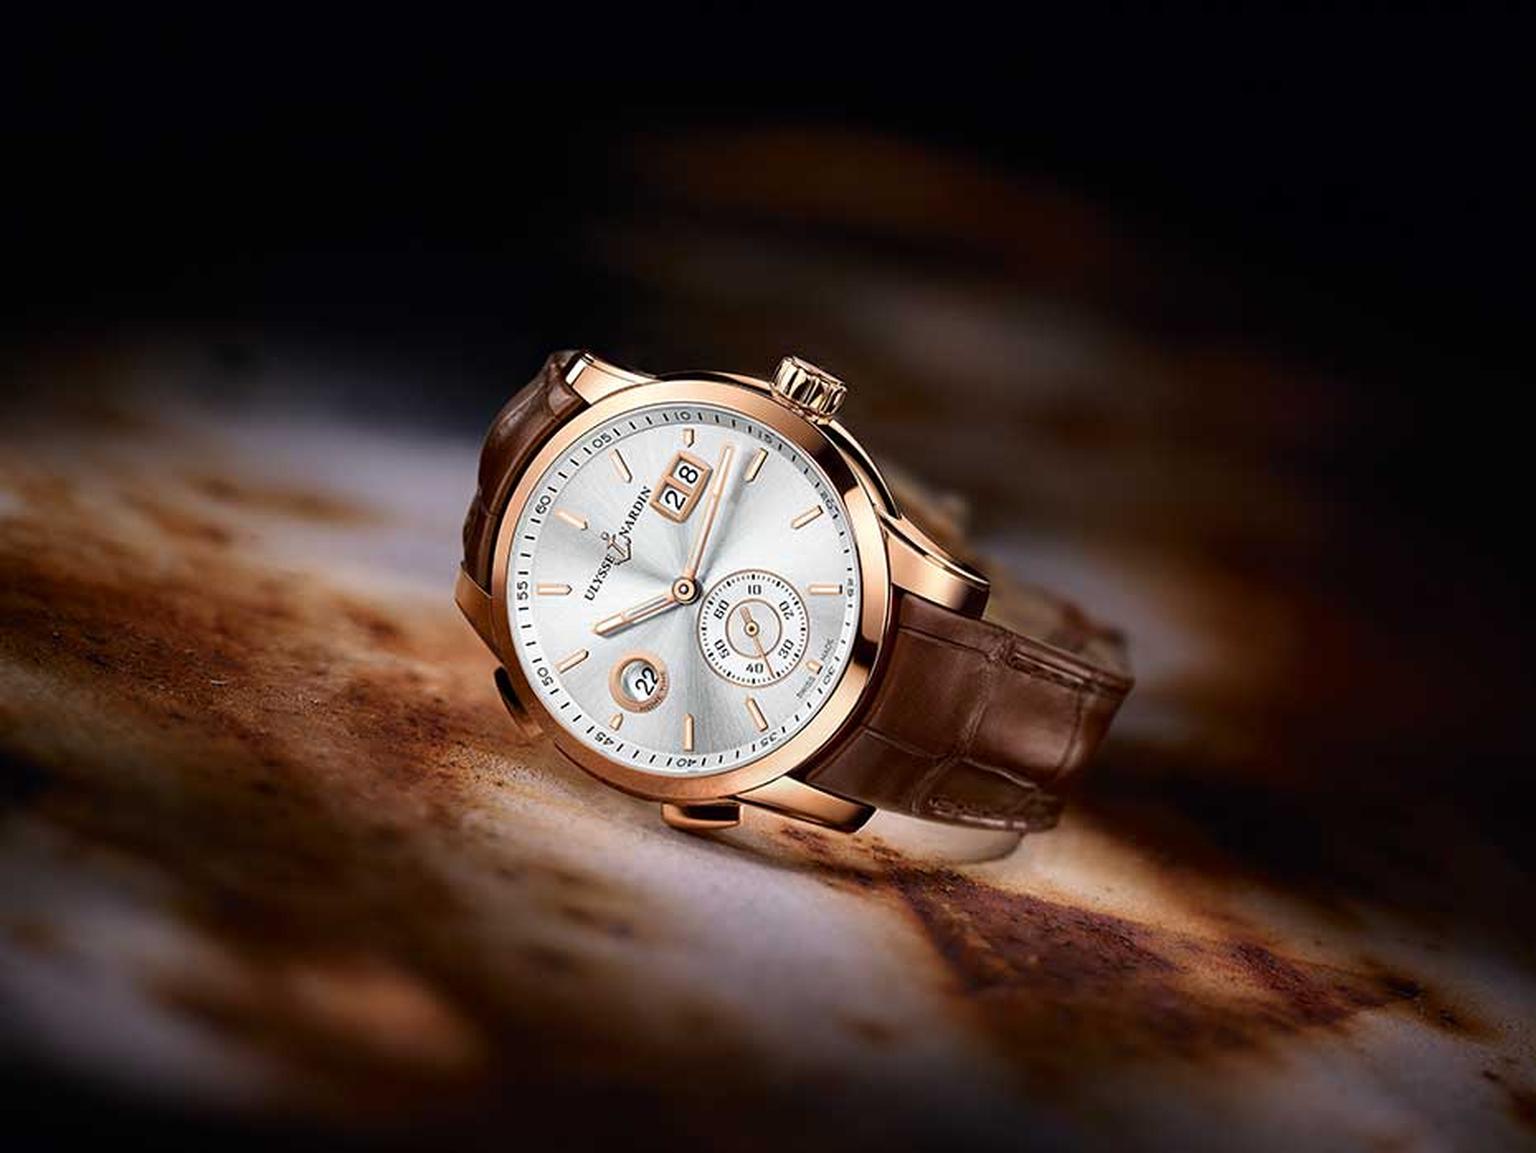 Ulysse Nardin 2014 Dual Time Manufacture watch.